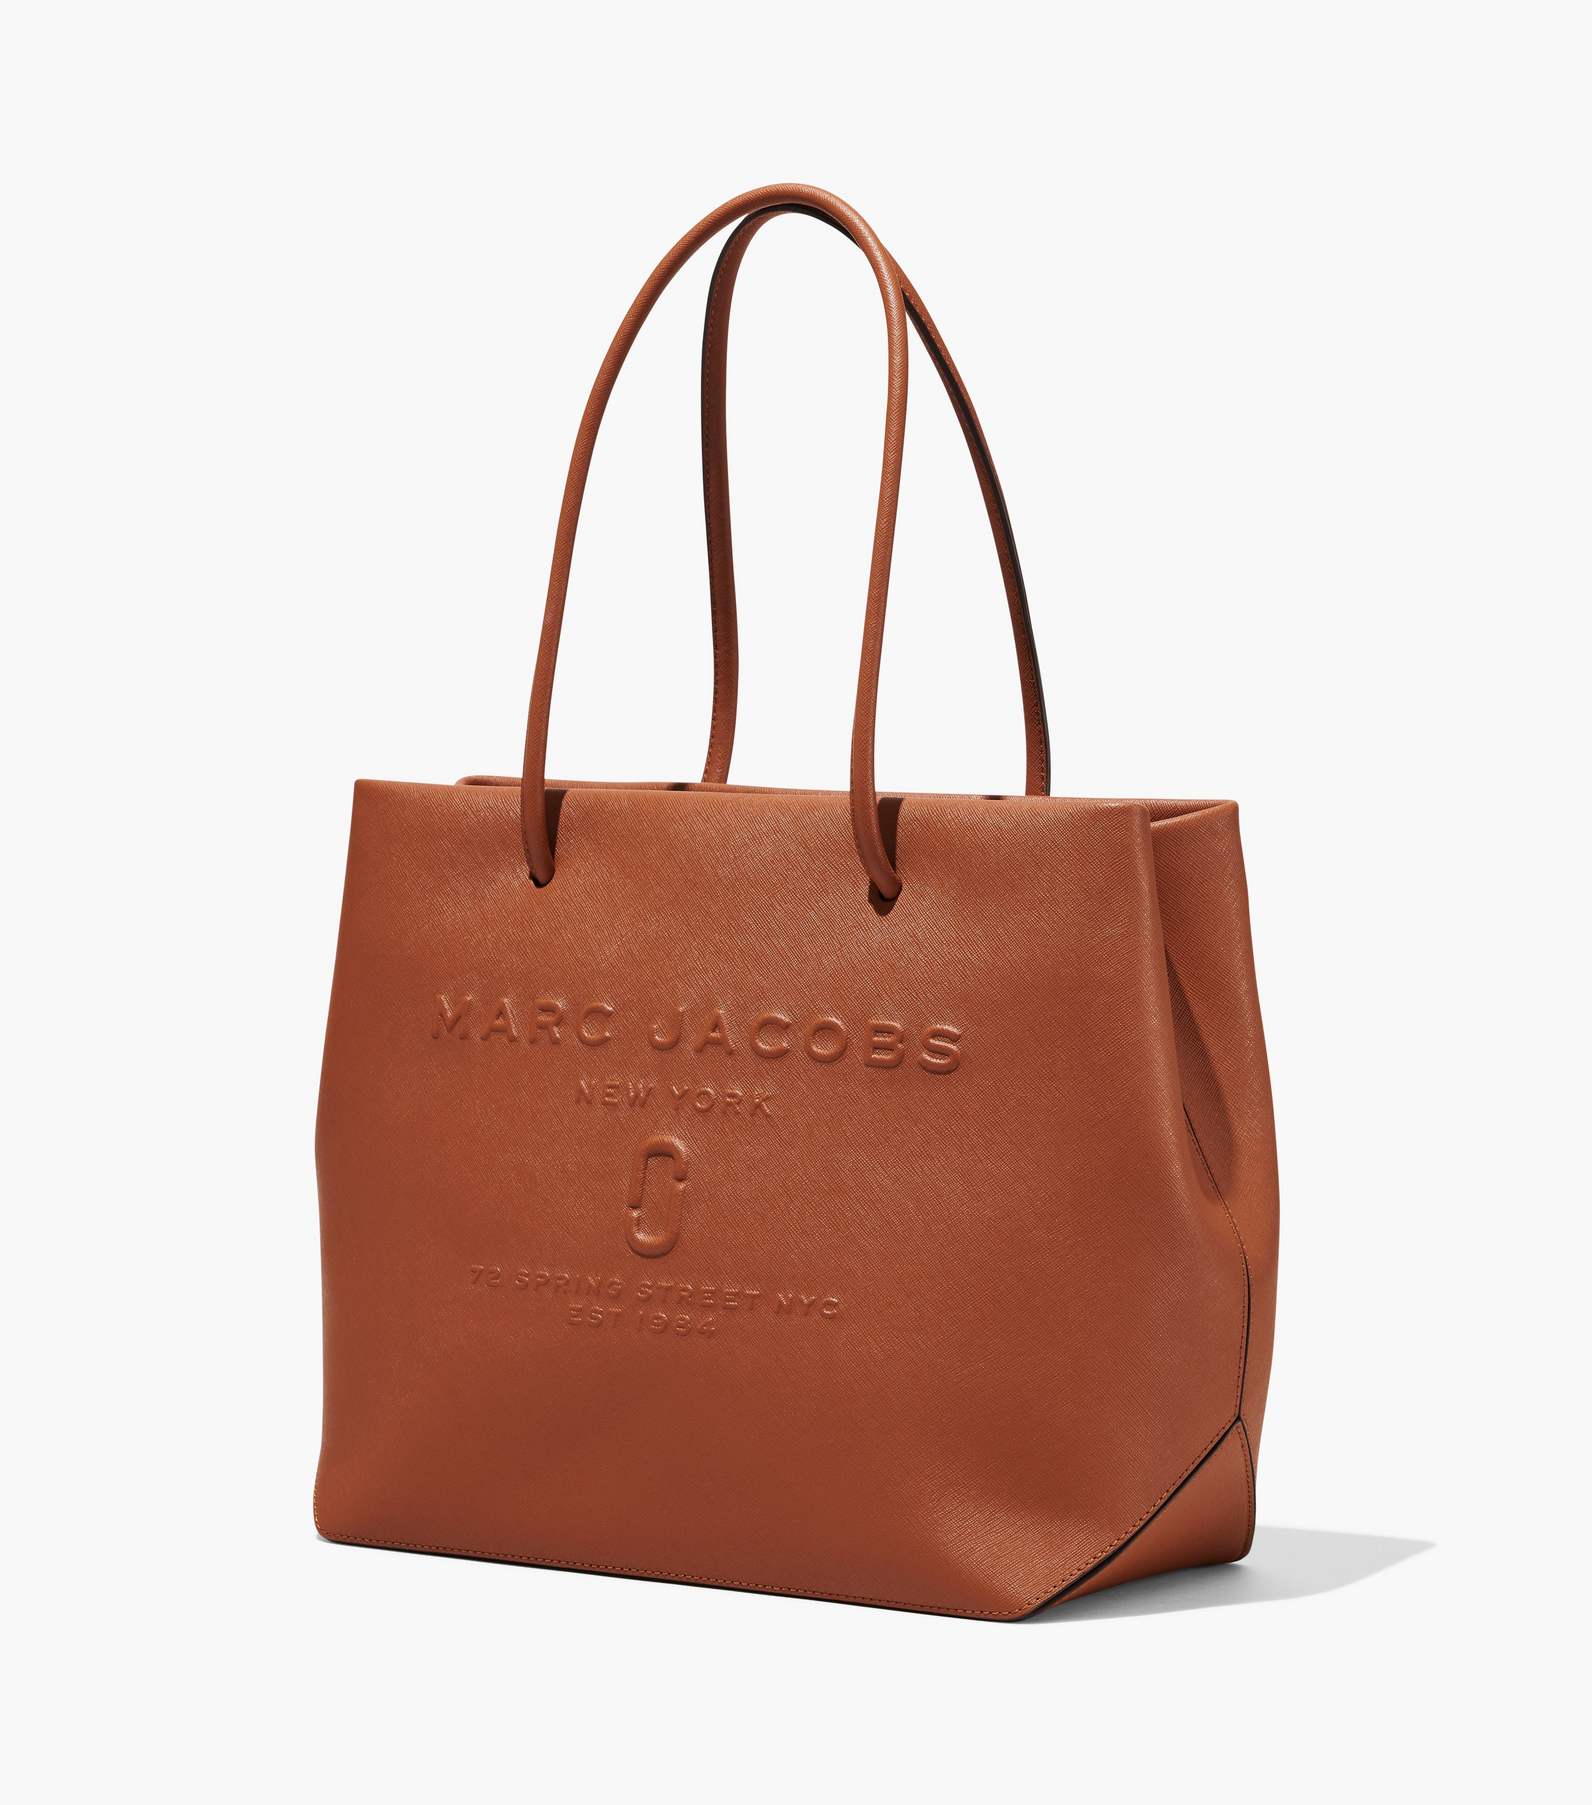 Marc Jacobs - The Logo Shopper East West Tote - Belmont Luxe